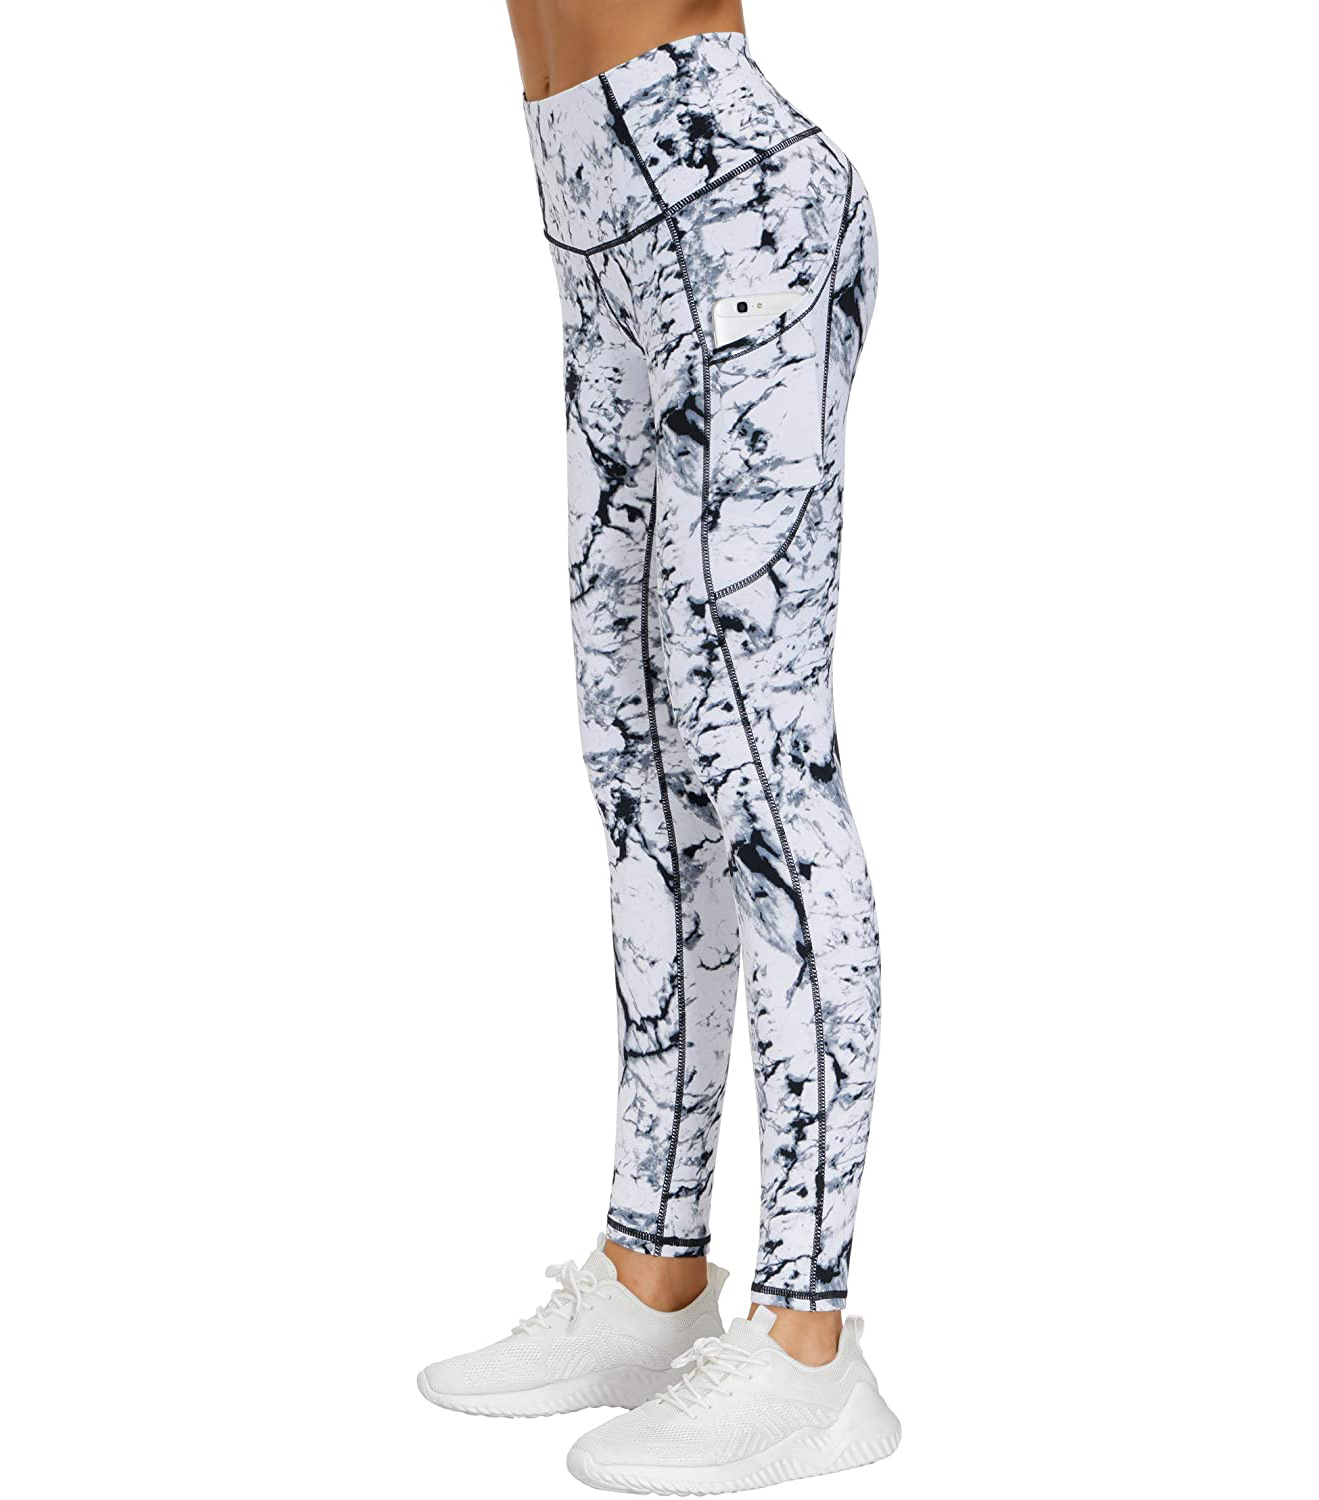 pålægge Meget Perle The 21 Best Printed Leggings to Add to Your Workout Wardrobe | TheThirty